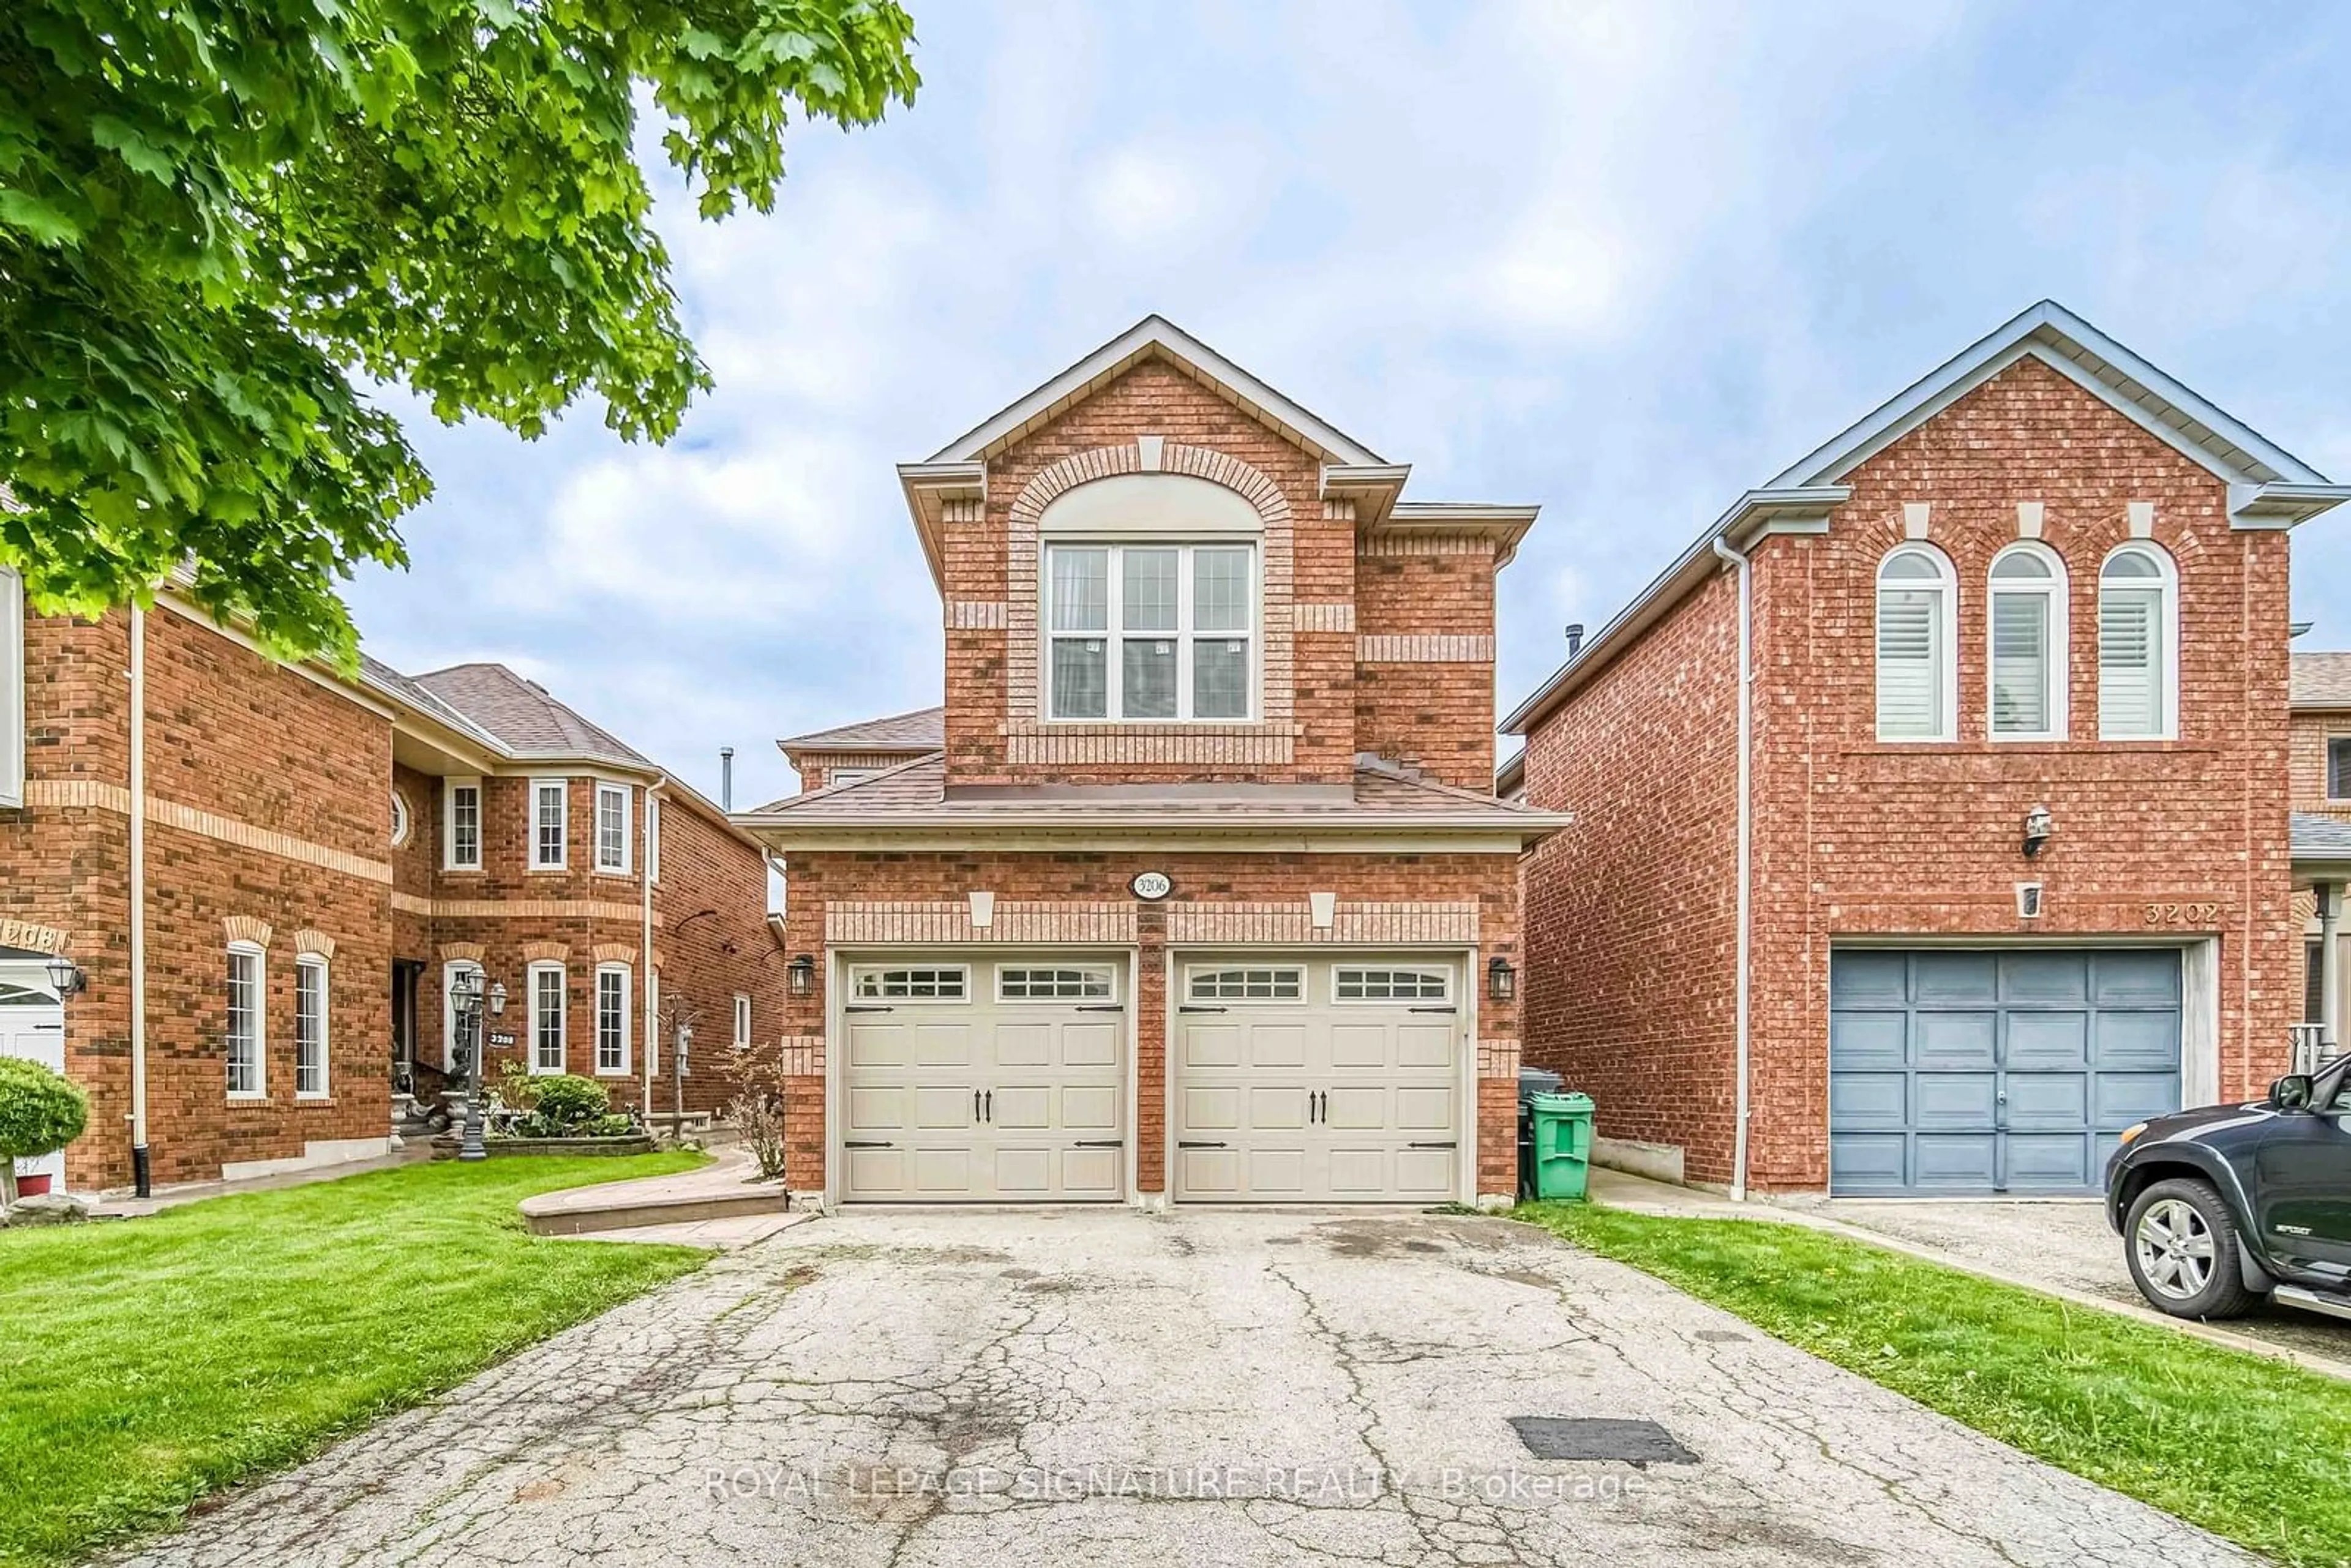 Home with brick exterior material for 3206 Forrestdale Circ, Mississauga Ontario L5N 6V4